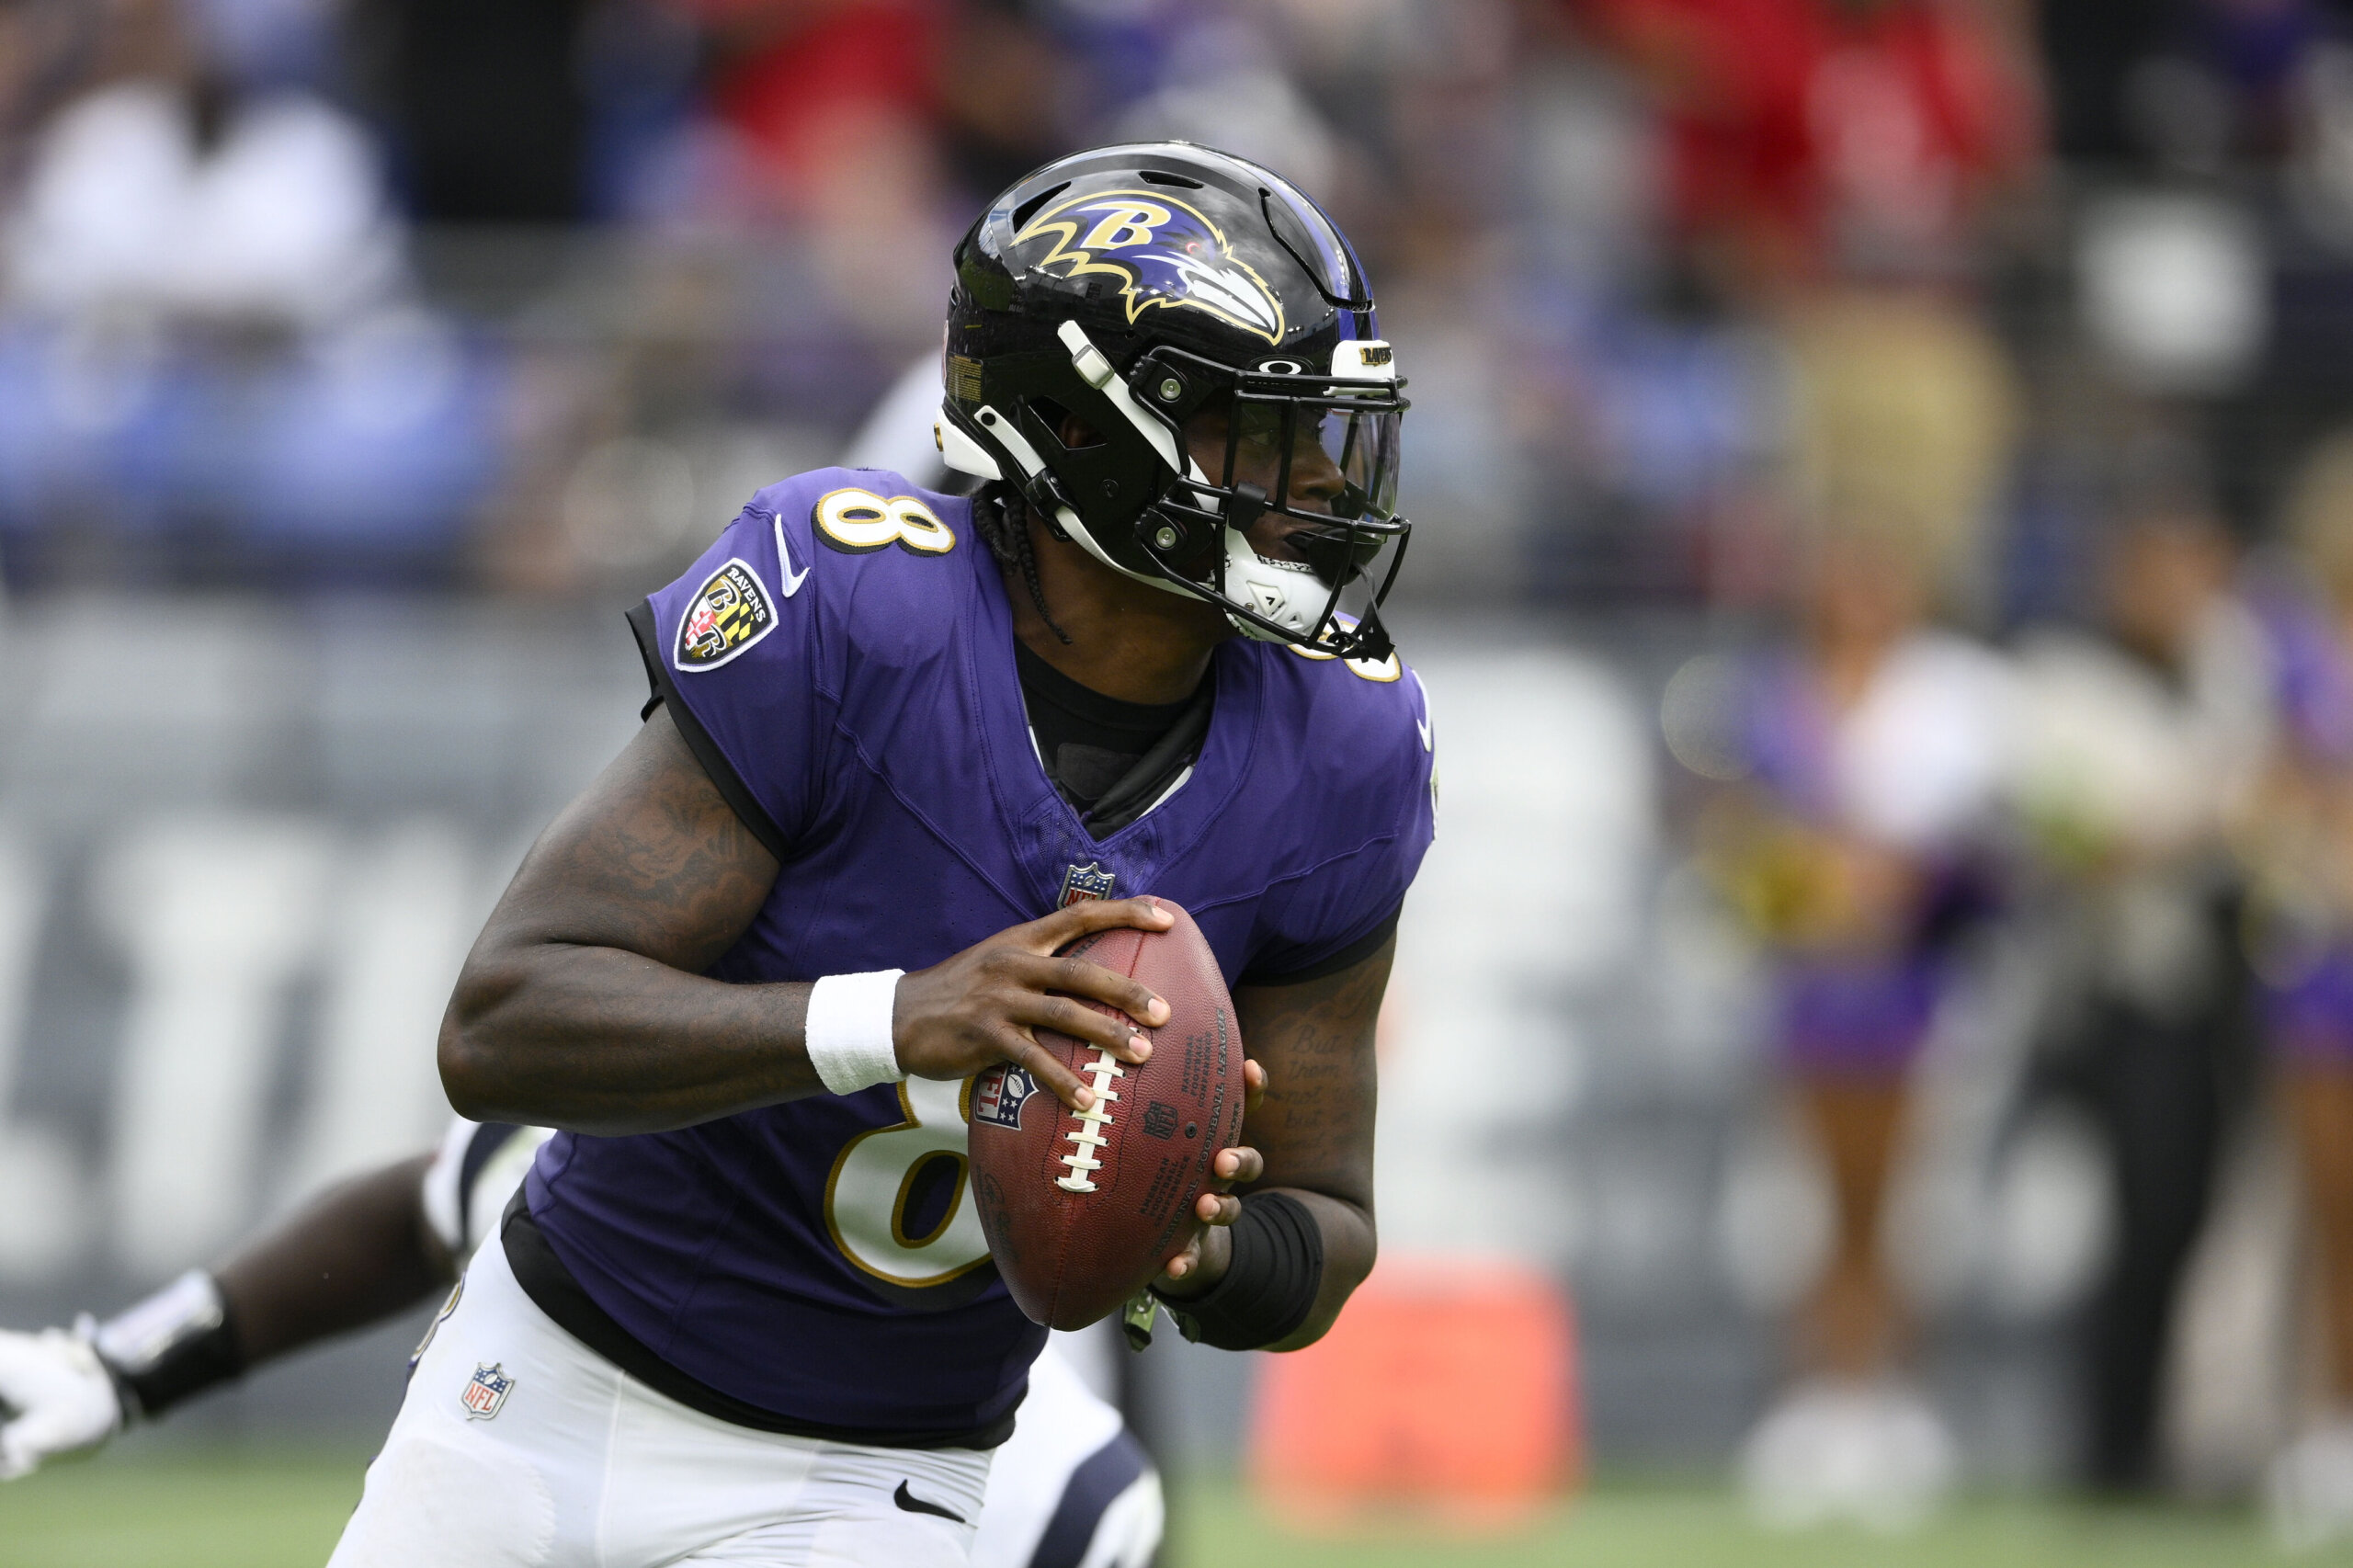 Ravens have a chance to improve to 3-0 when they host Indianapolis;  Richardson ruled out for Colts - WTOP News